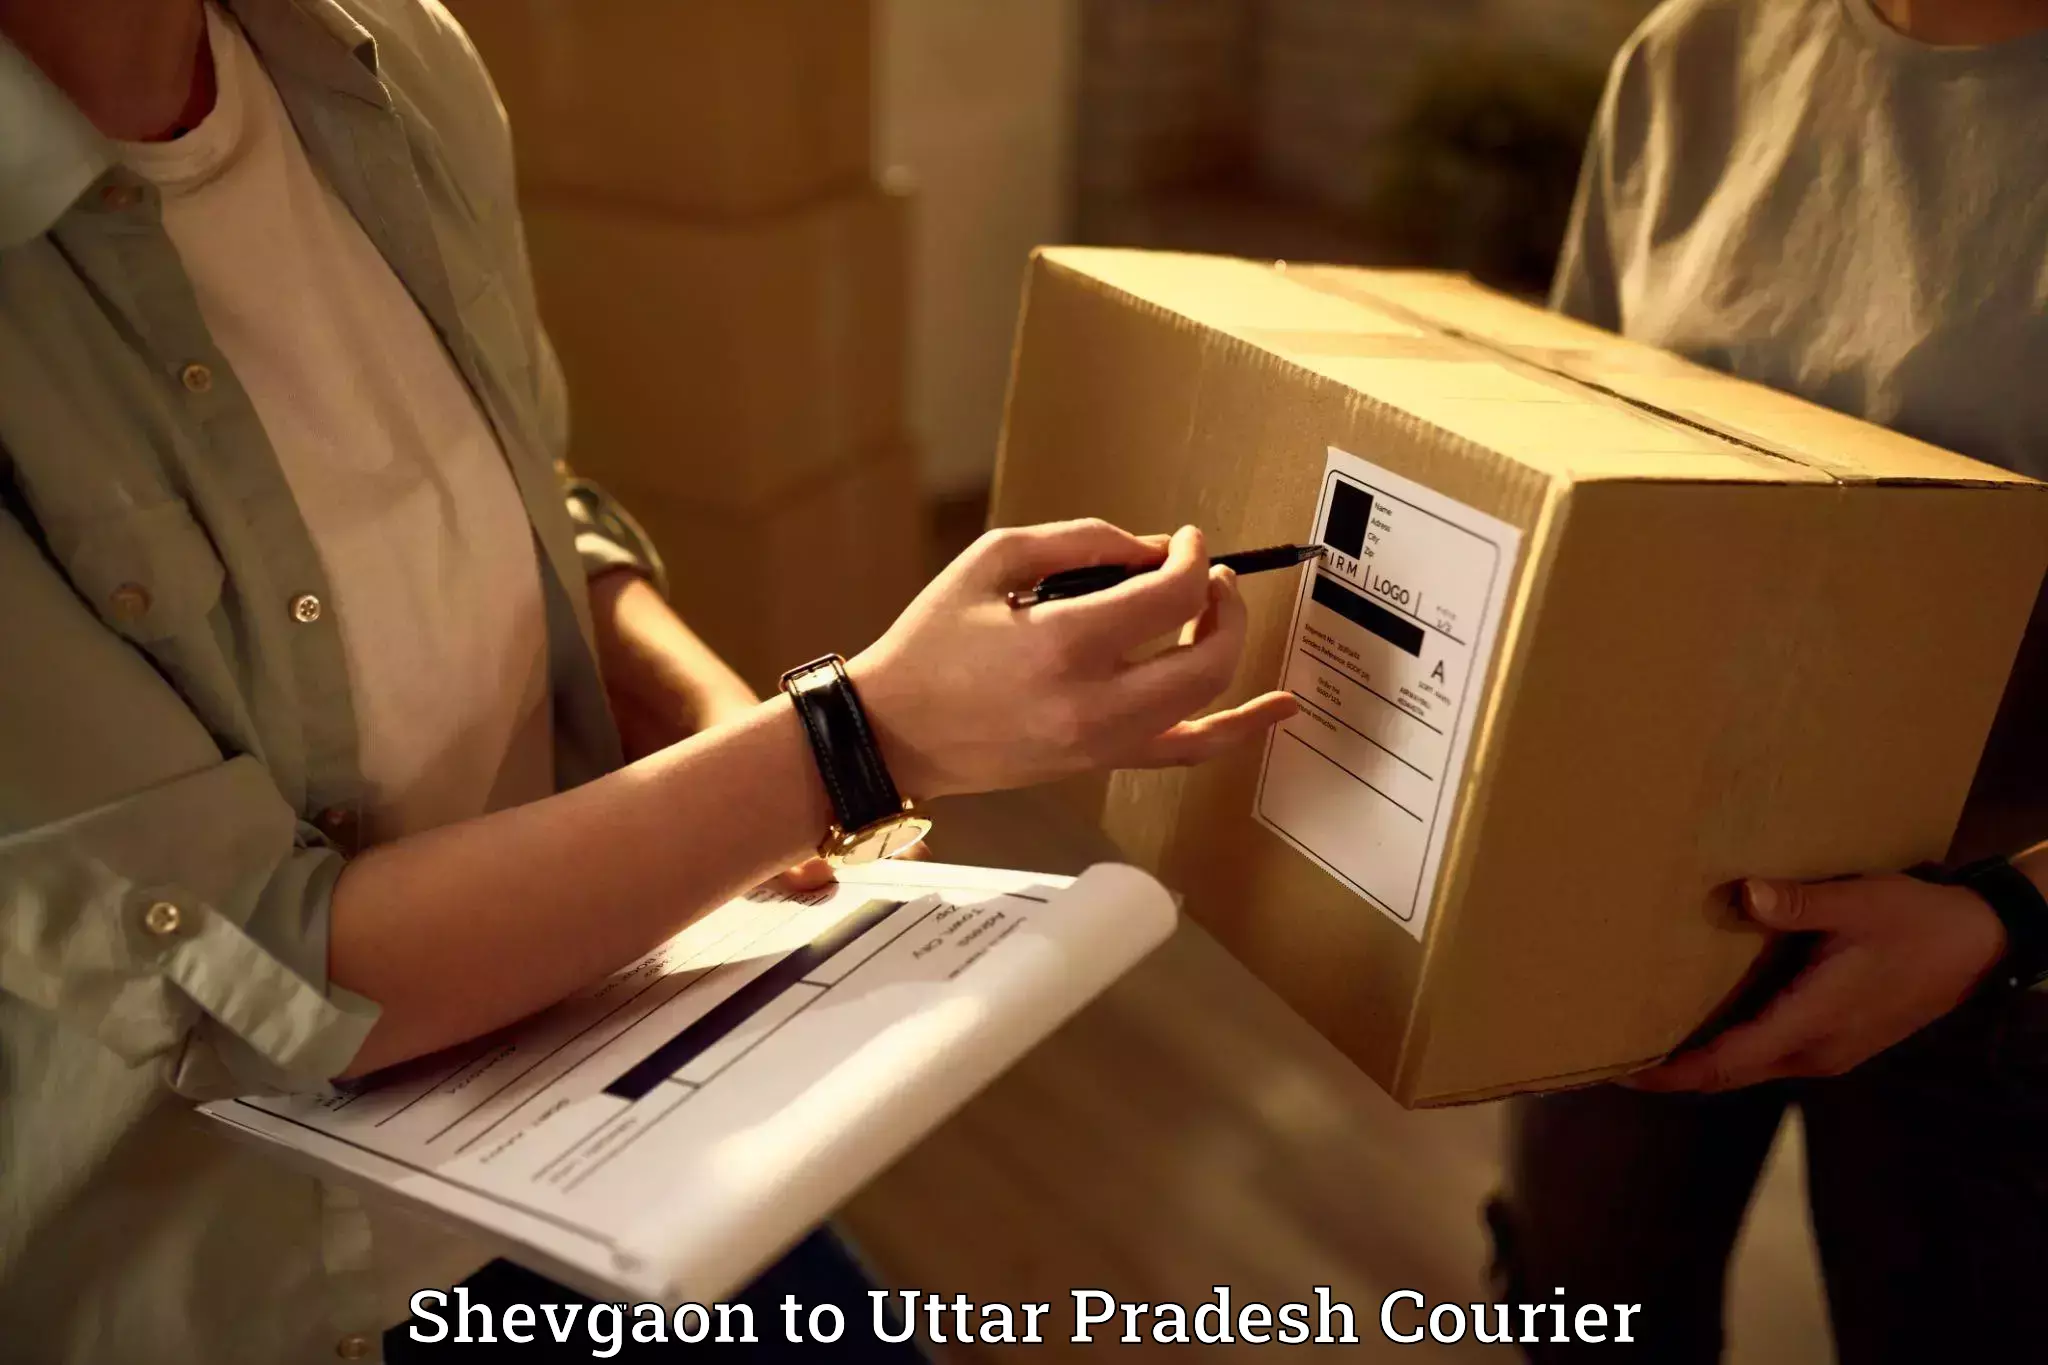 Trusted relocation experts Shevgaon to Sirathu